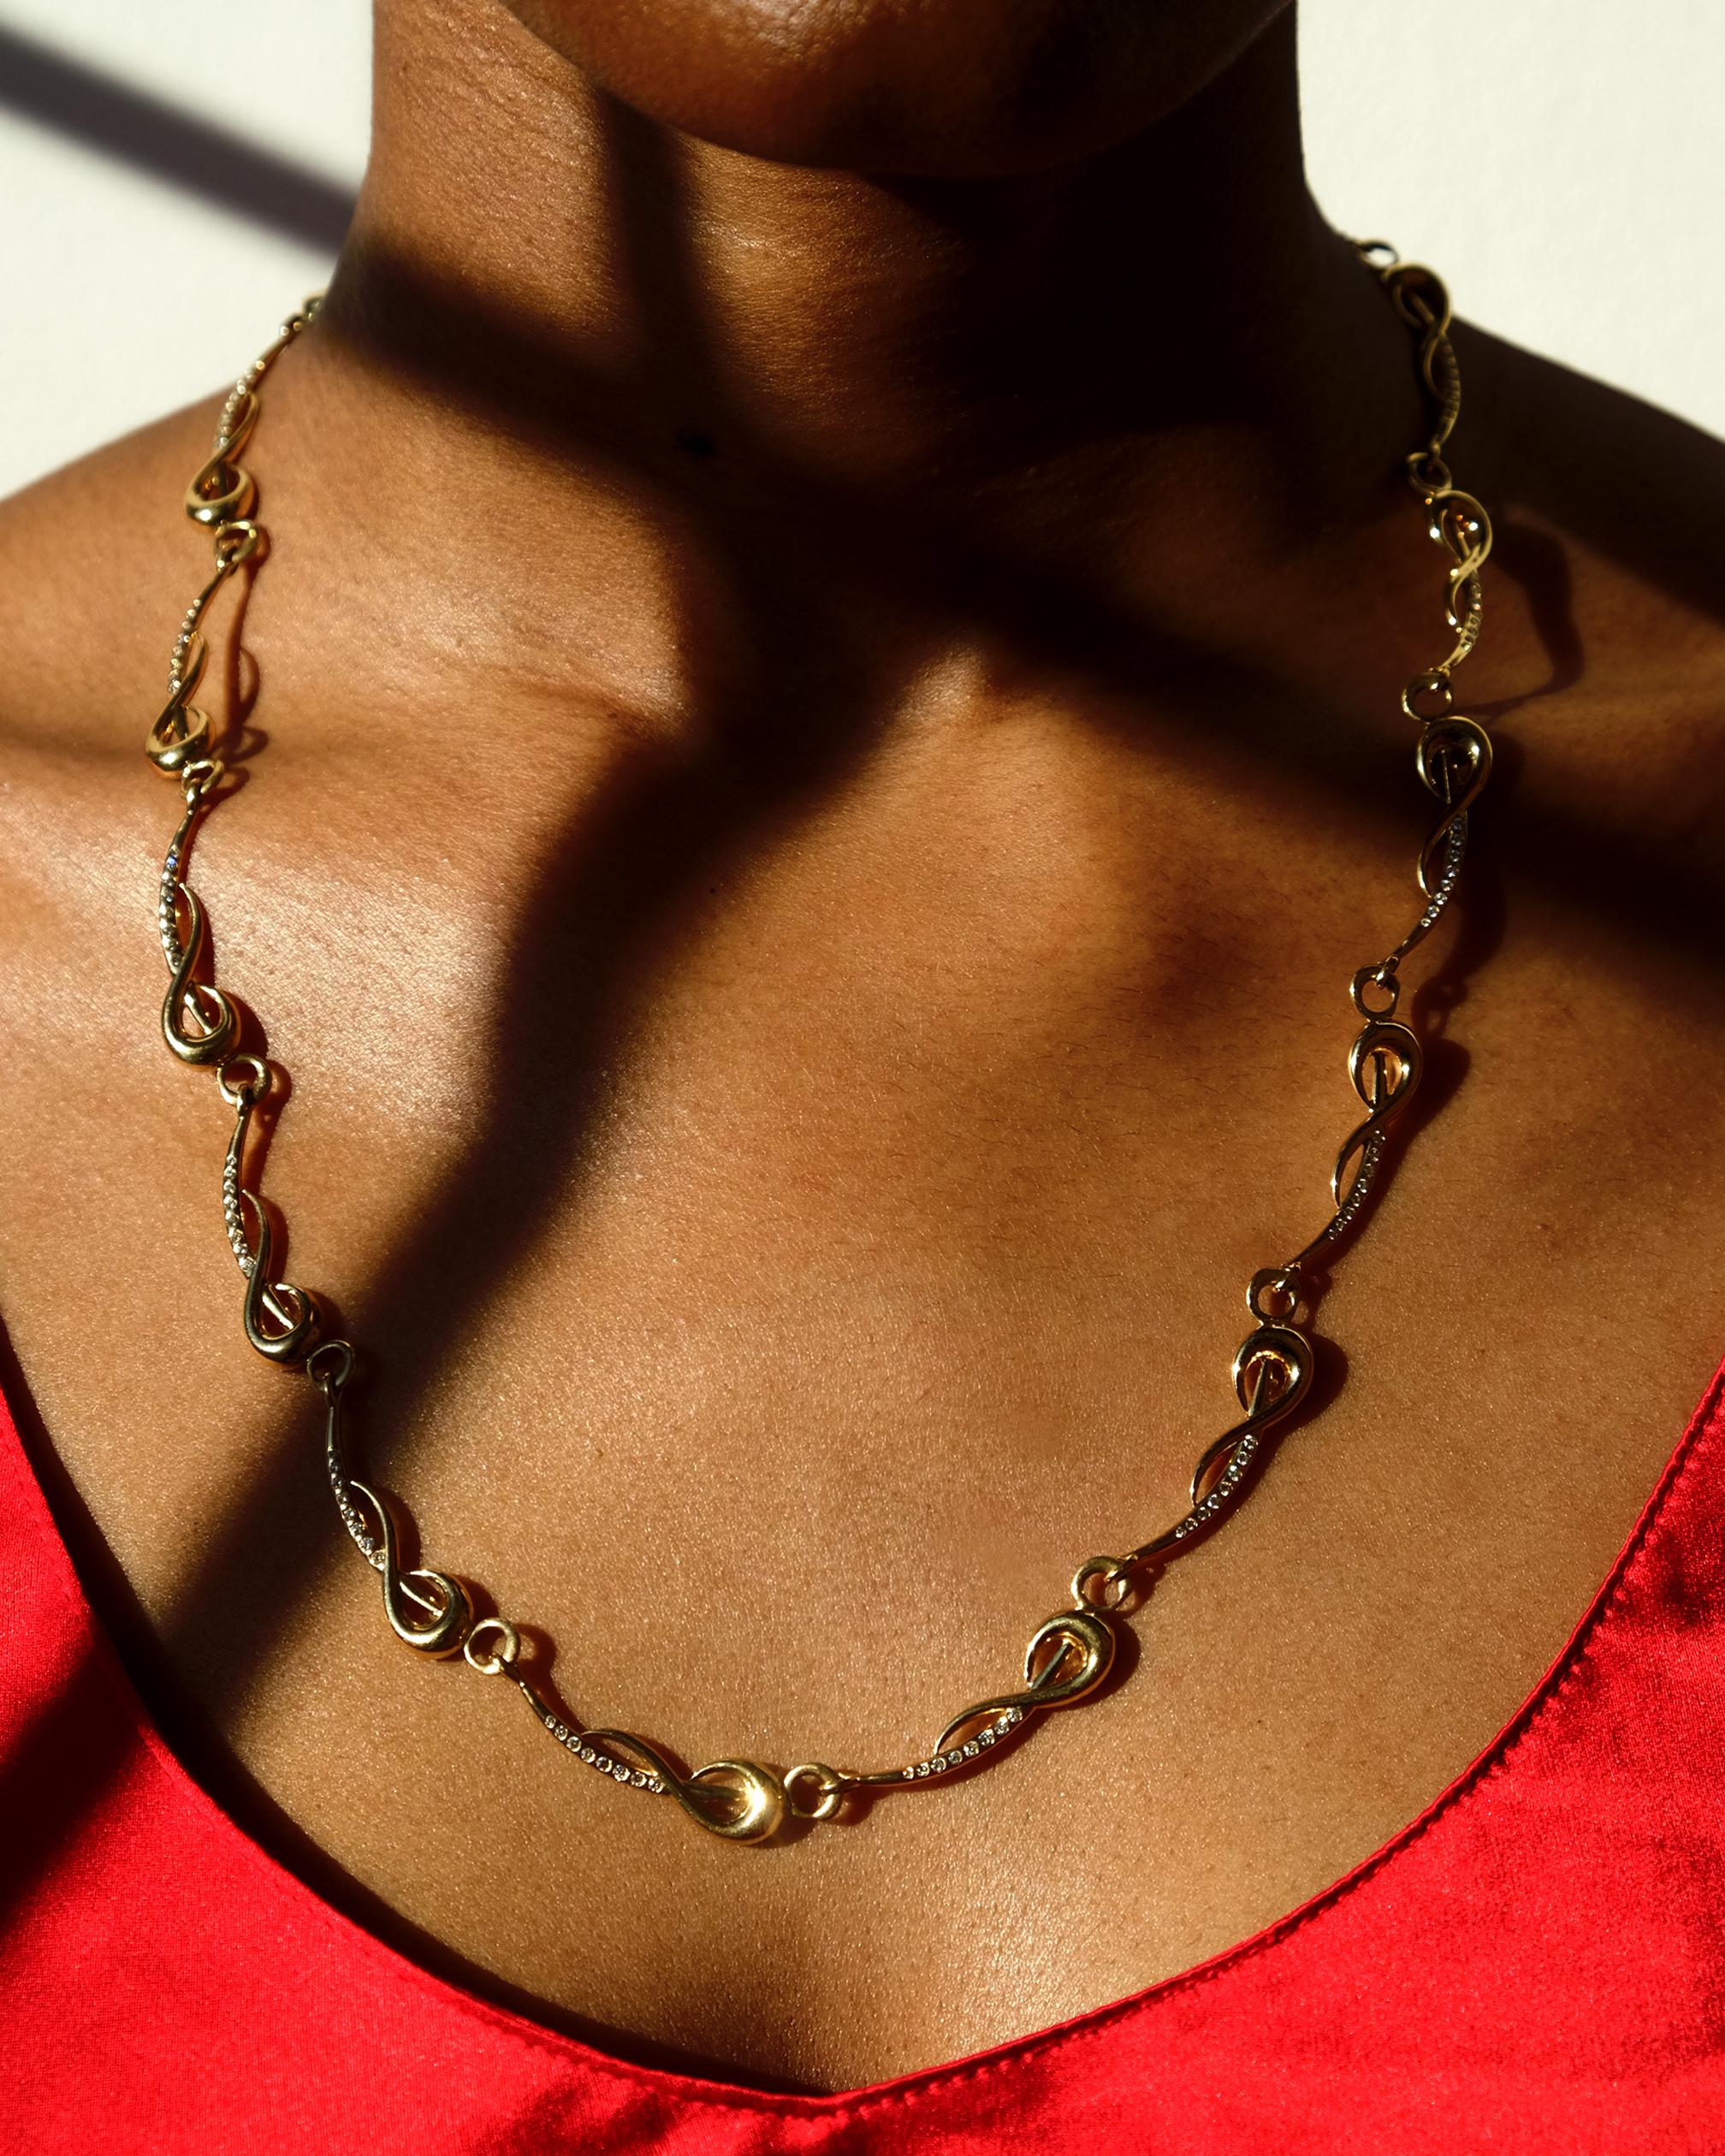 Inspired by the sword of Haitian revolutionary, Toussaint L'Ouverture. 18k gold link chain necklace set with diamonds. 